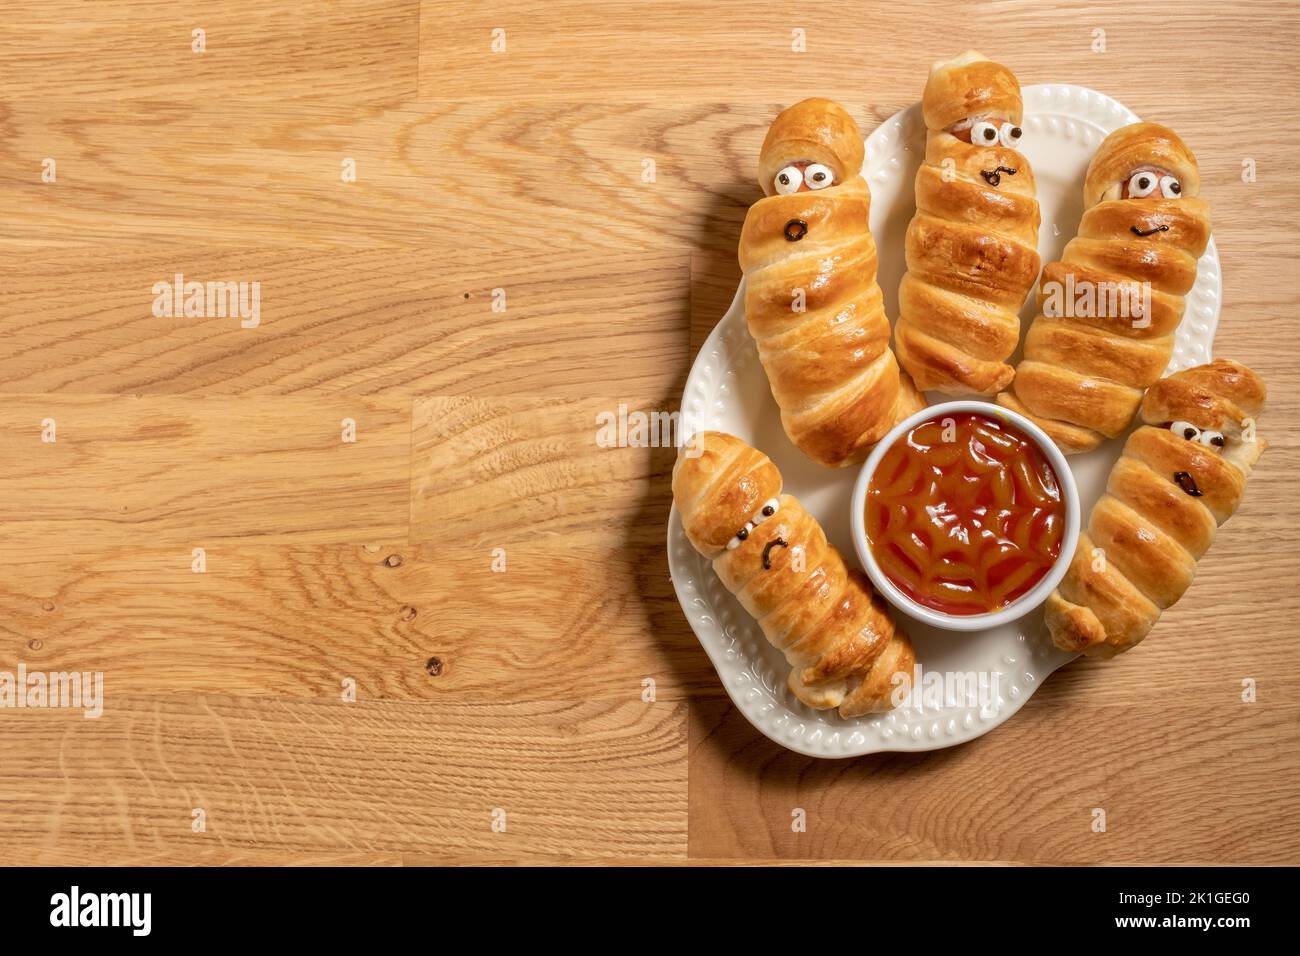 Mummy sausages scary halloween party food decoration wrapped in dough Stock Photo